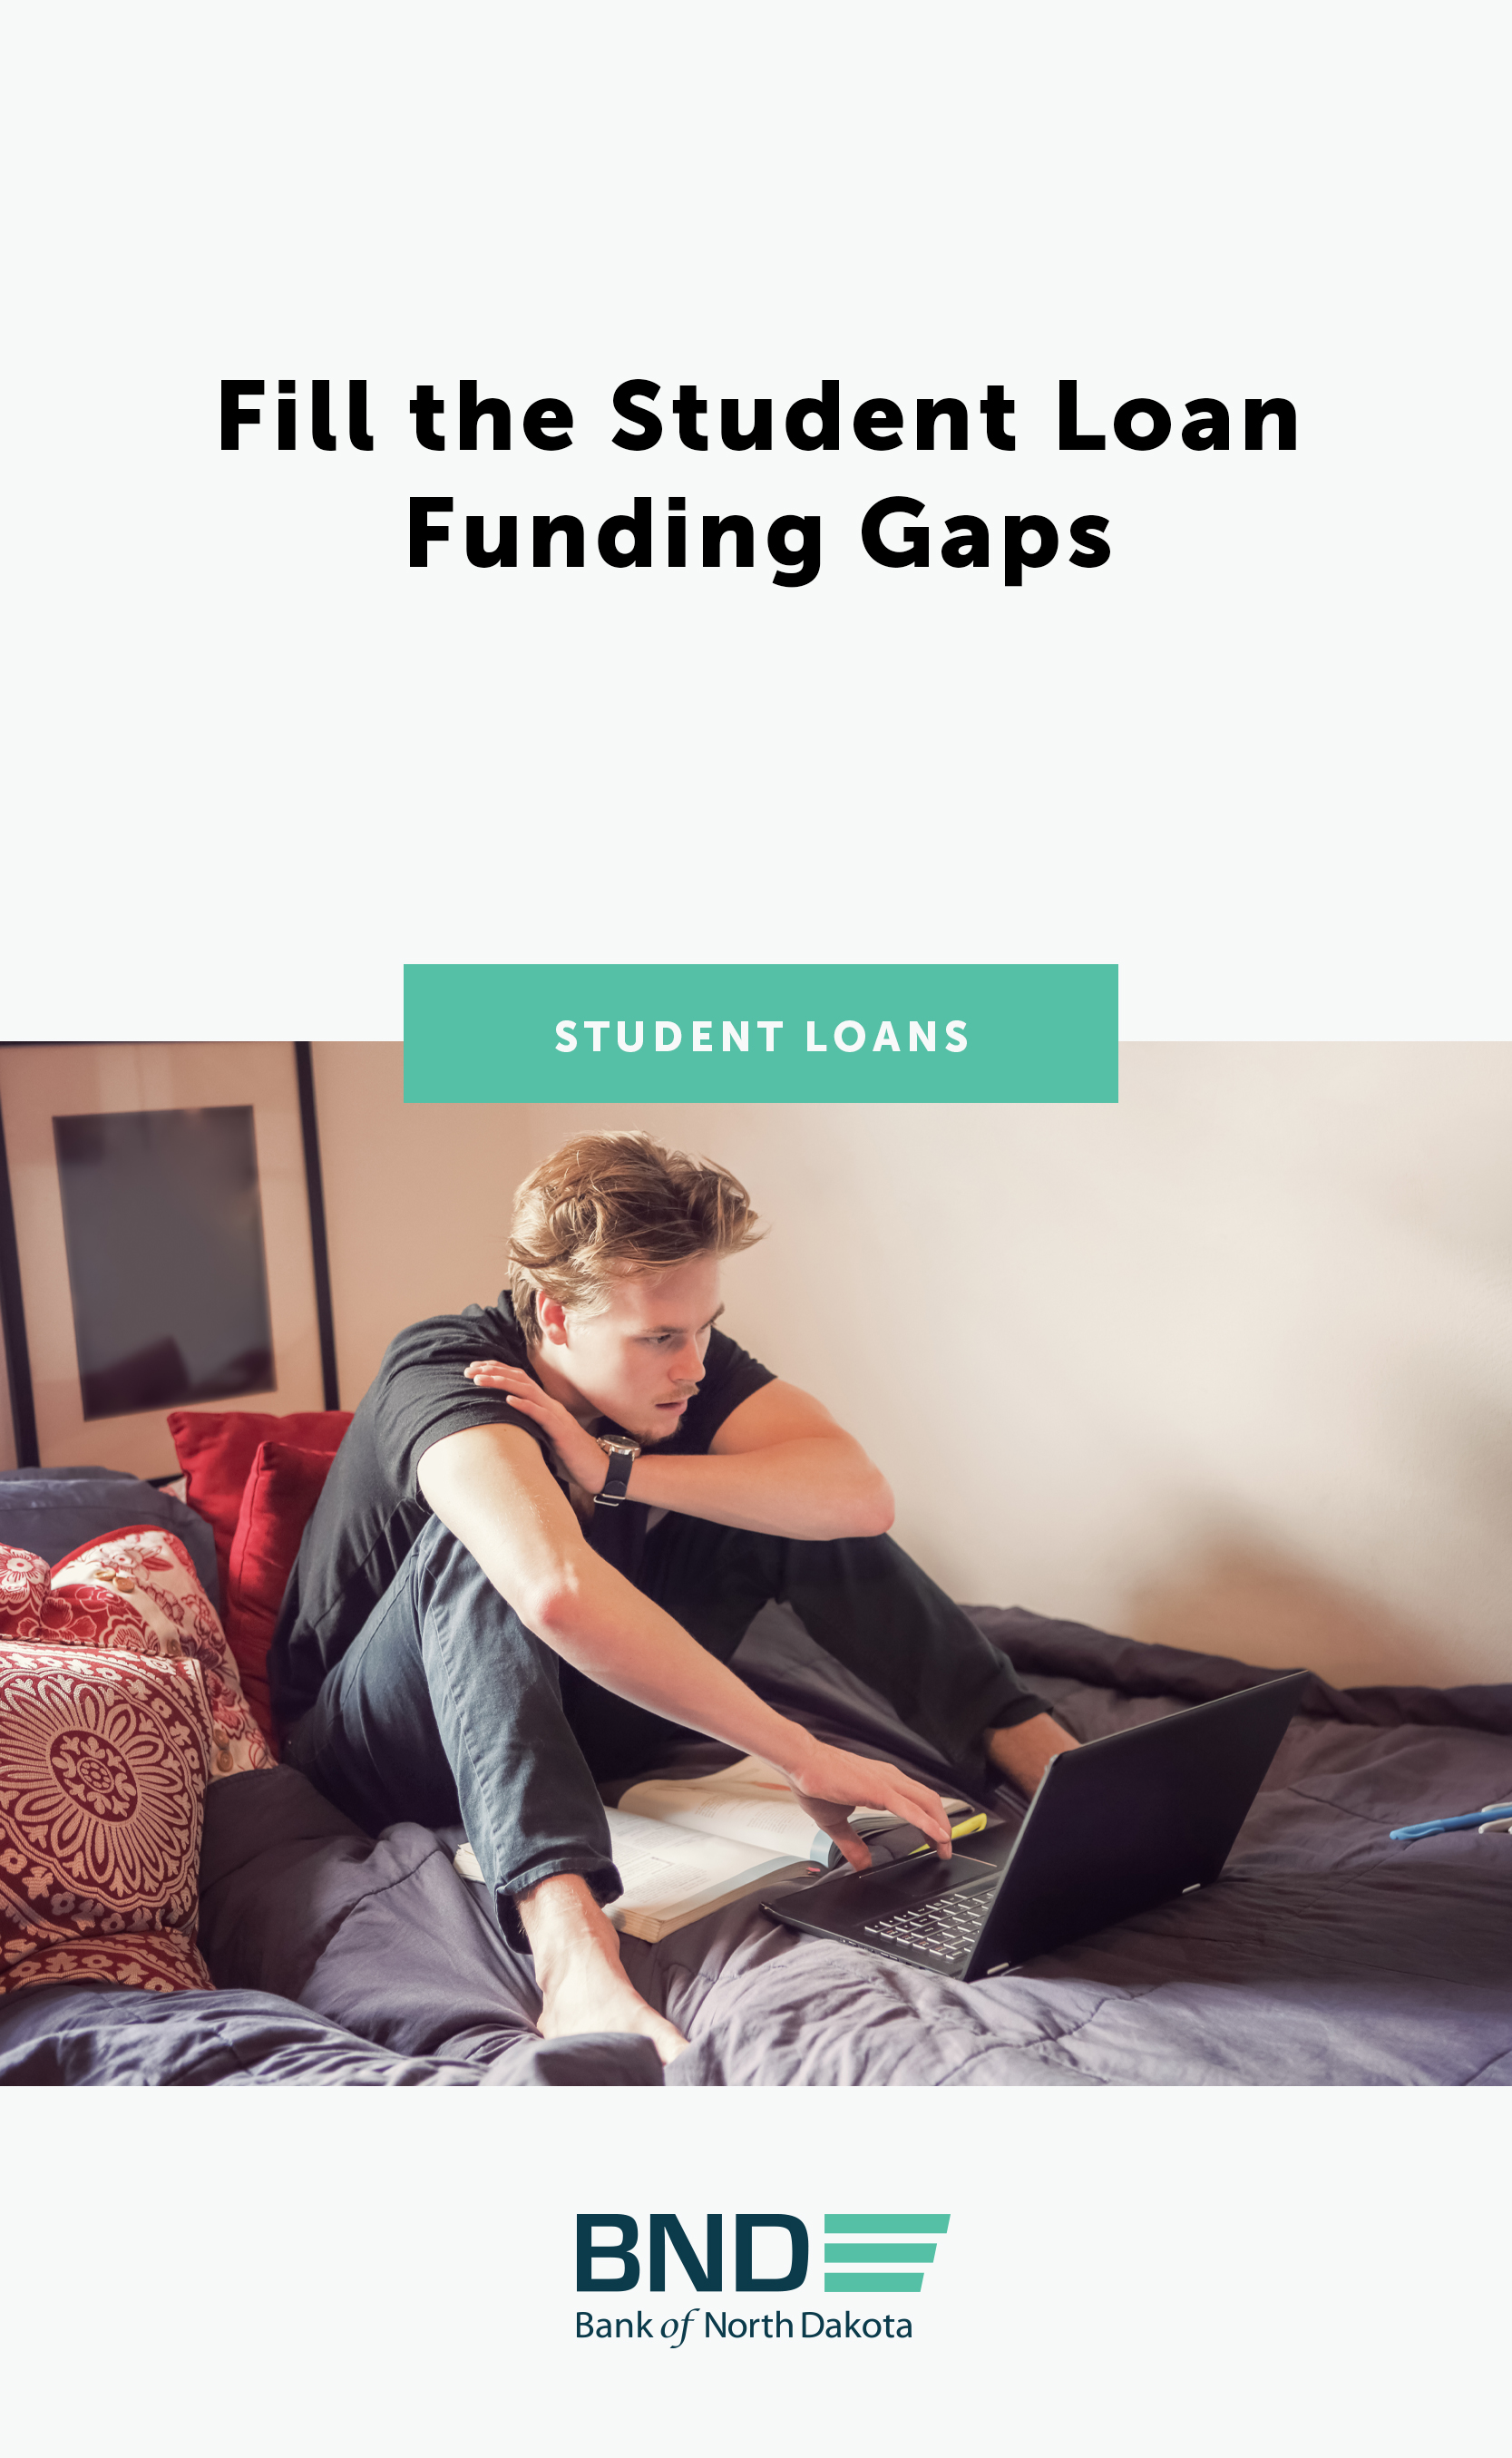 Fill-the-Student-Loan-Funding-Gaps